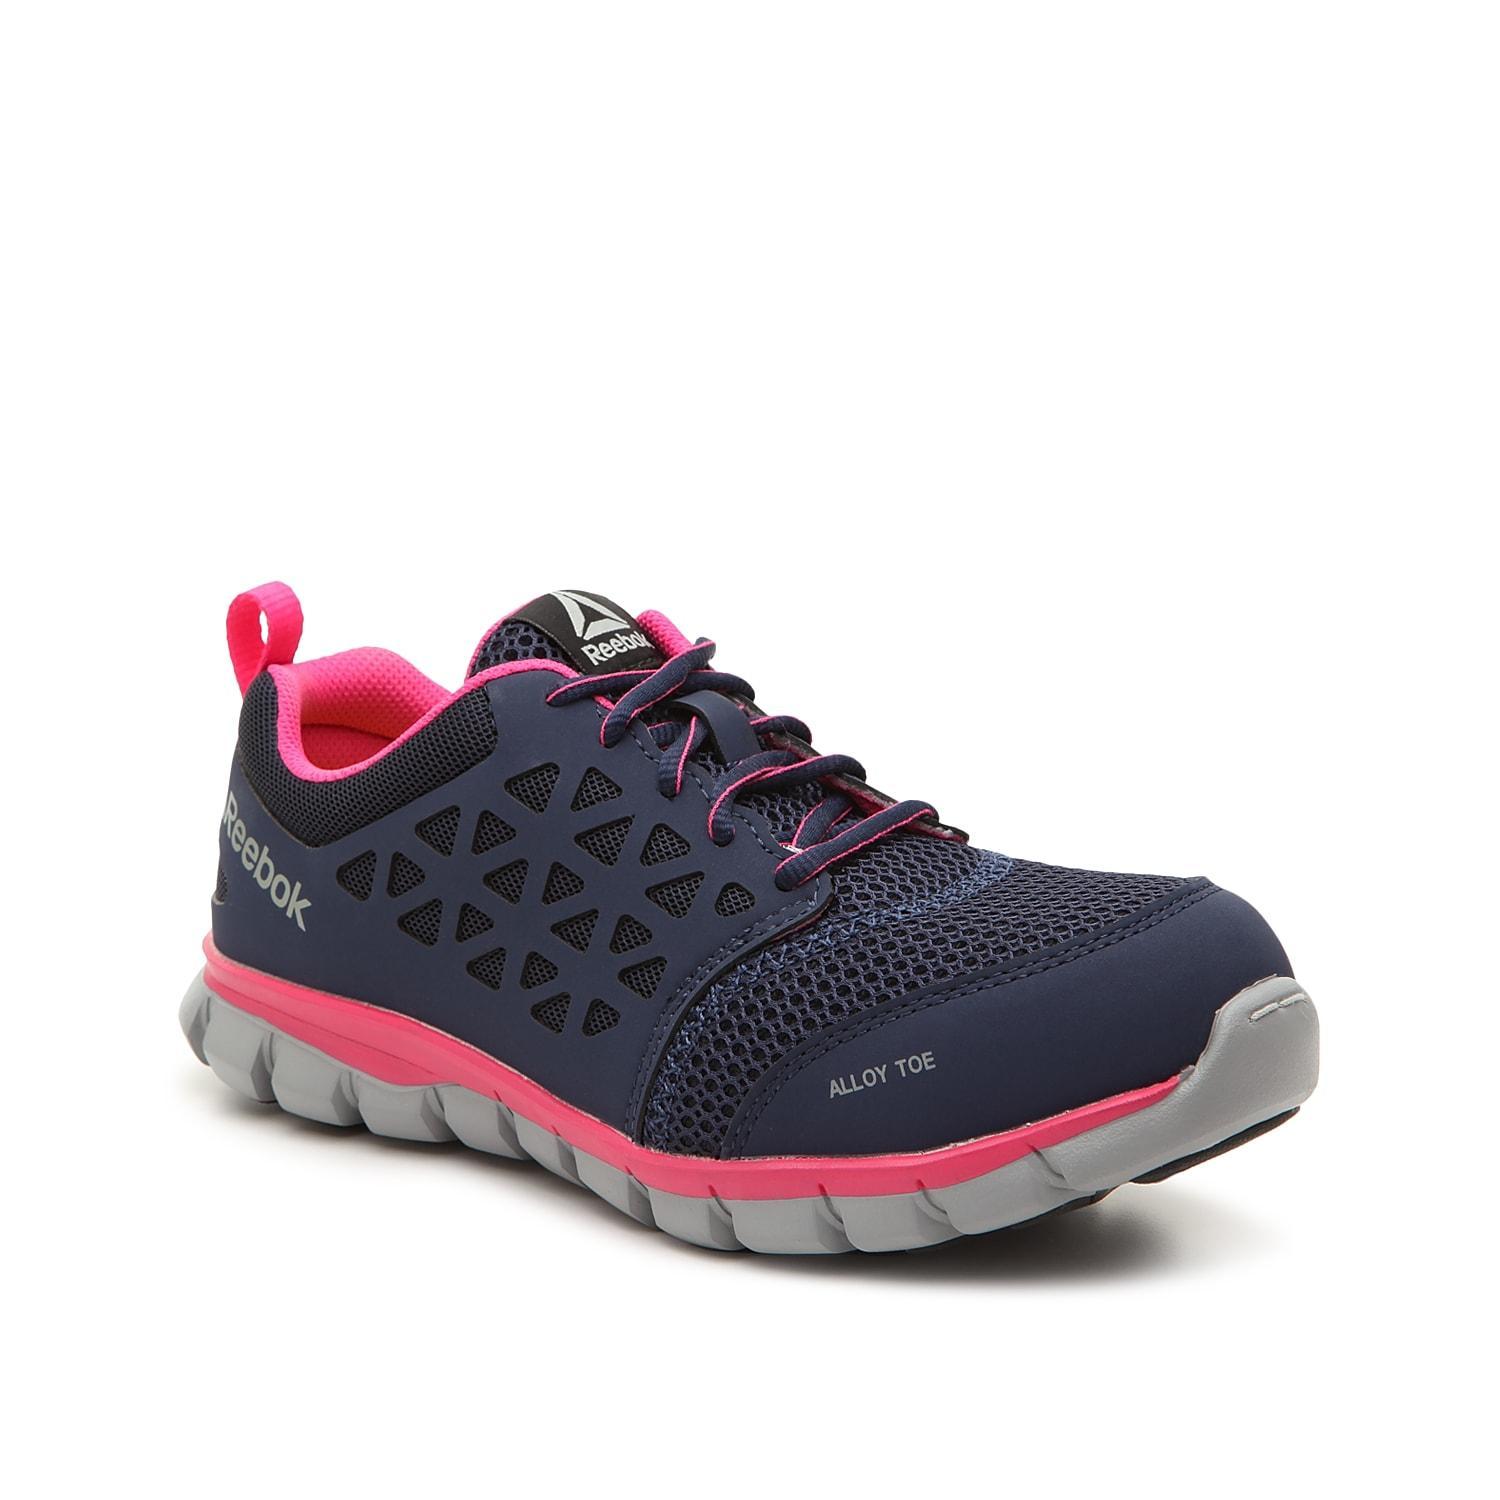 Reebok Work Sublite Cushion Work Alloy Toe EH Pink) Women's Work Boots Product Image